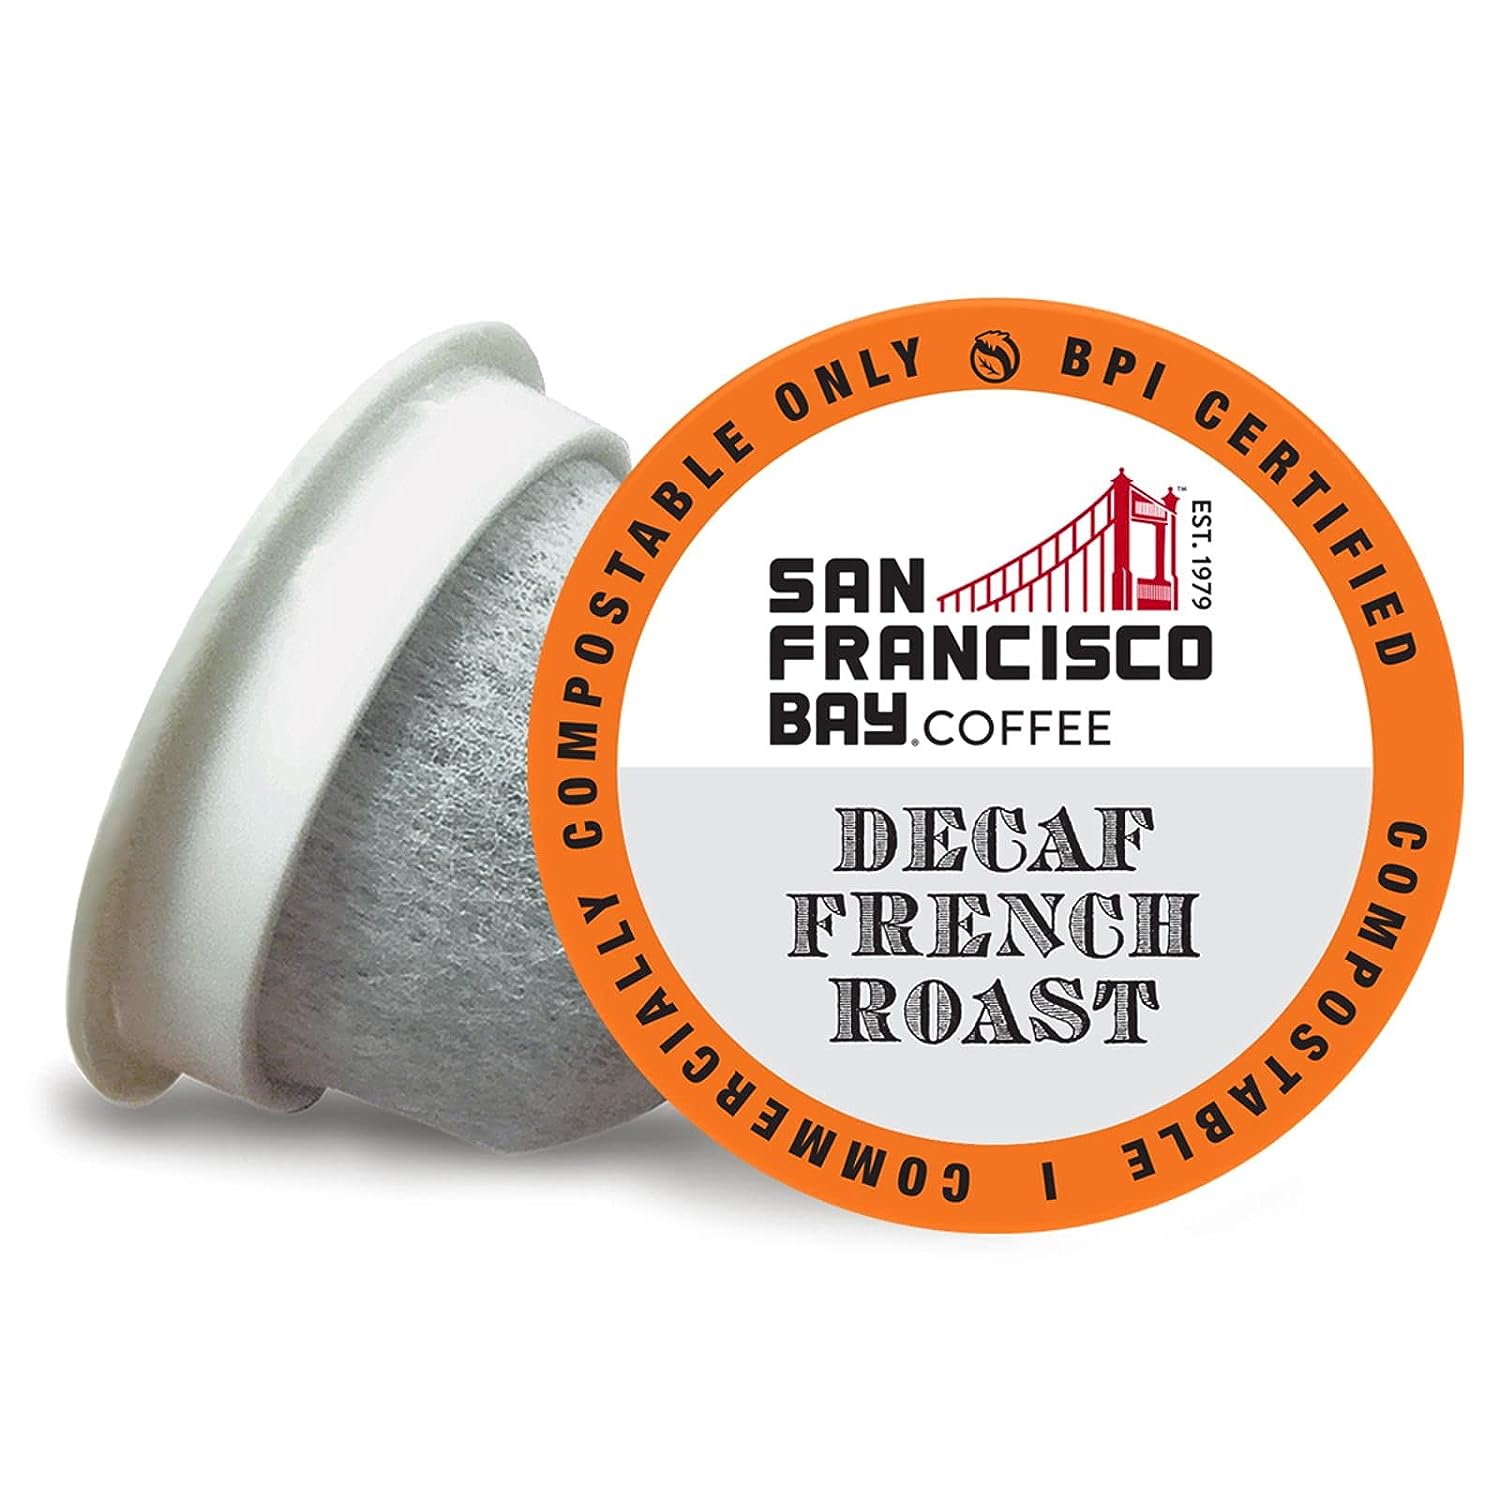 San Francisco Bay Compostable Coffee Pods - DECAF French Roast (80 Ct) K Cup Compatible including Keurig 2.0, Dark Roast, Swiss Water Processed